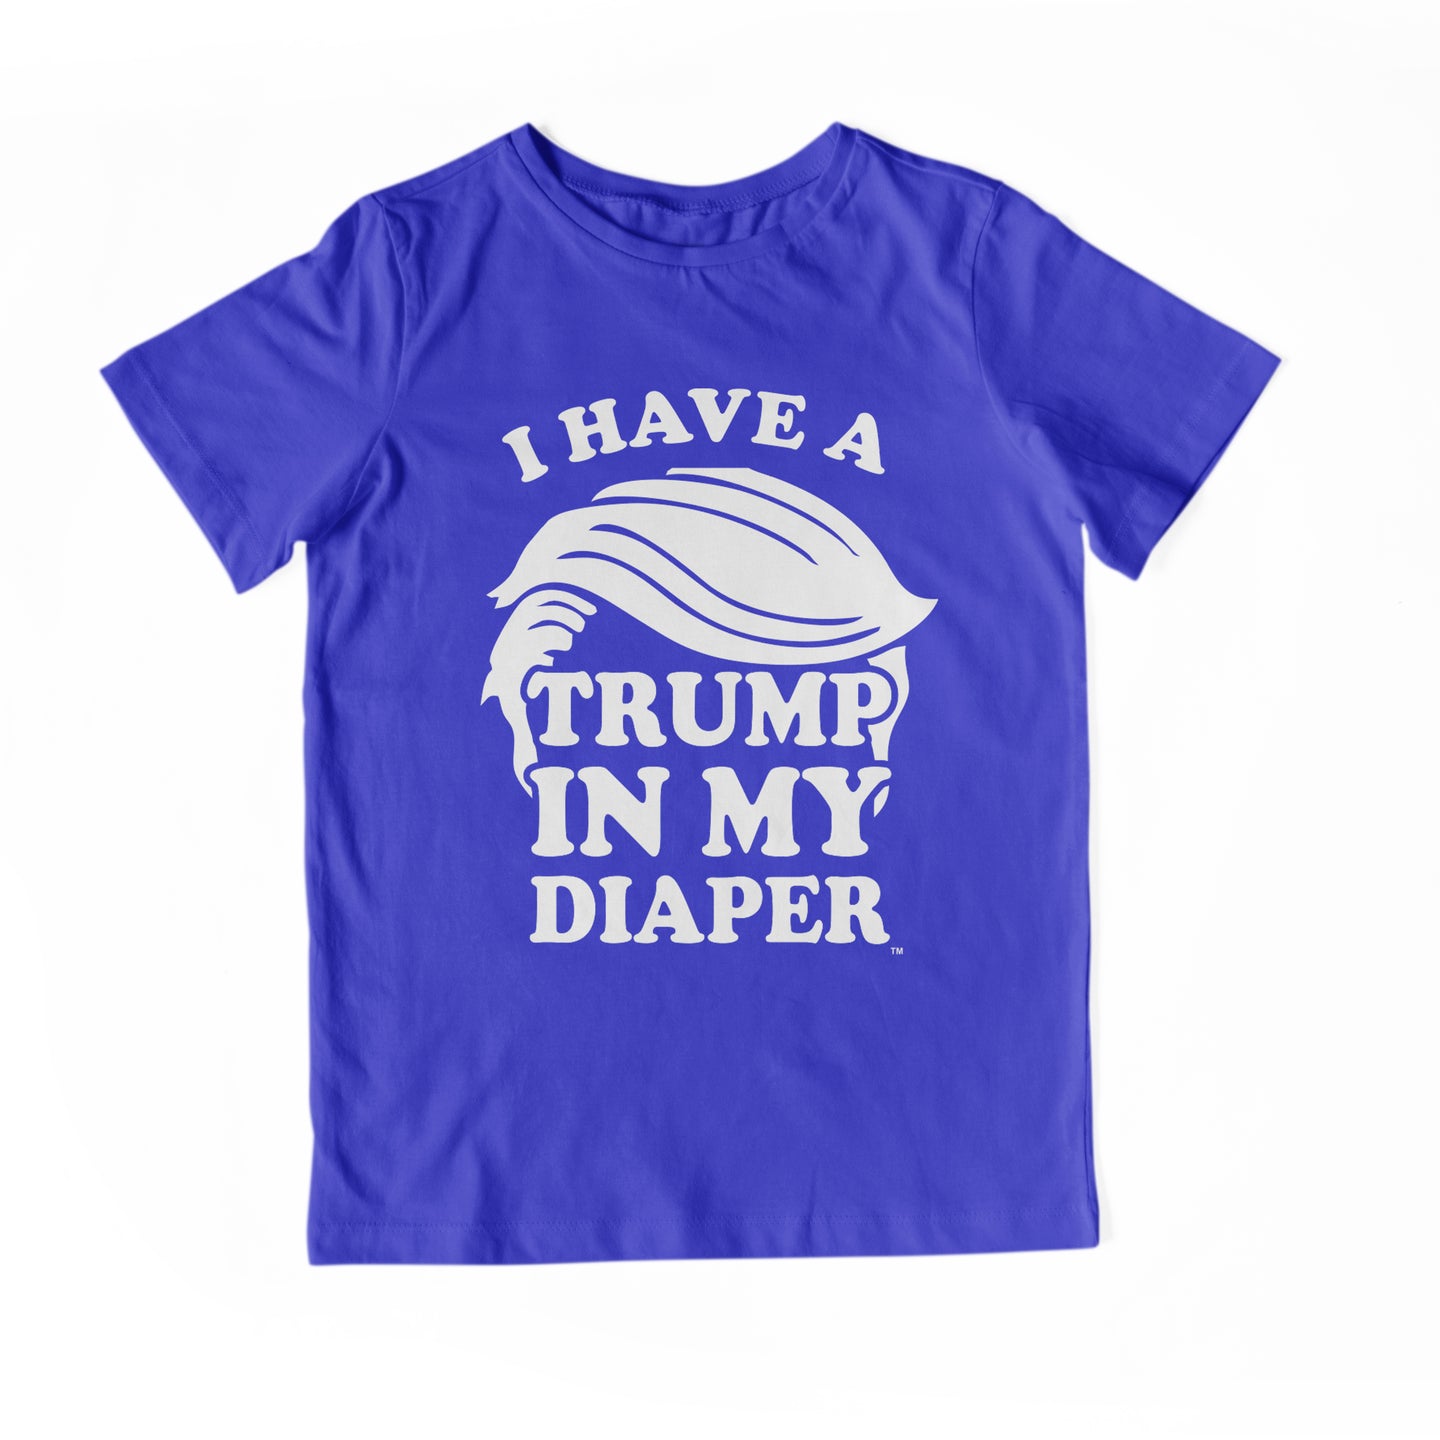 I HAVE A TRUMP IN MY DIAPER Child Tee